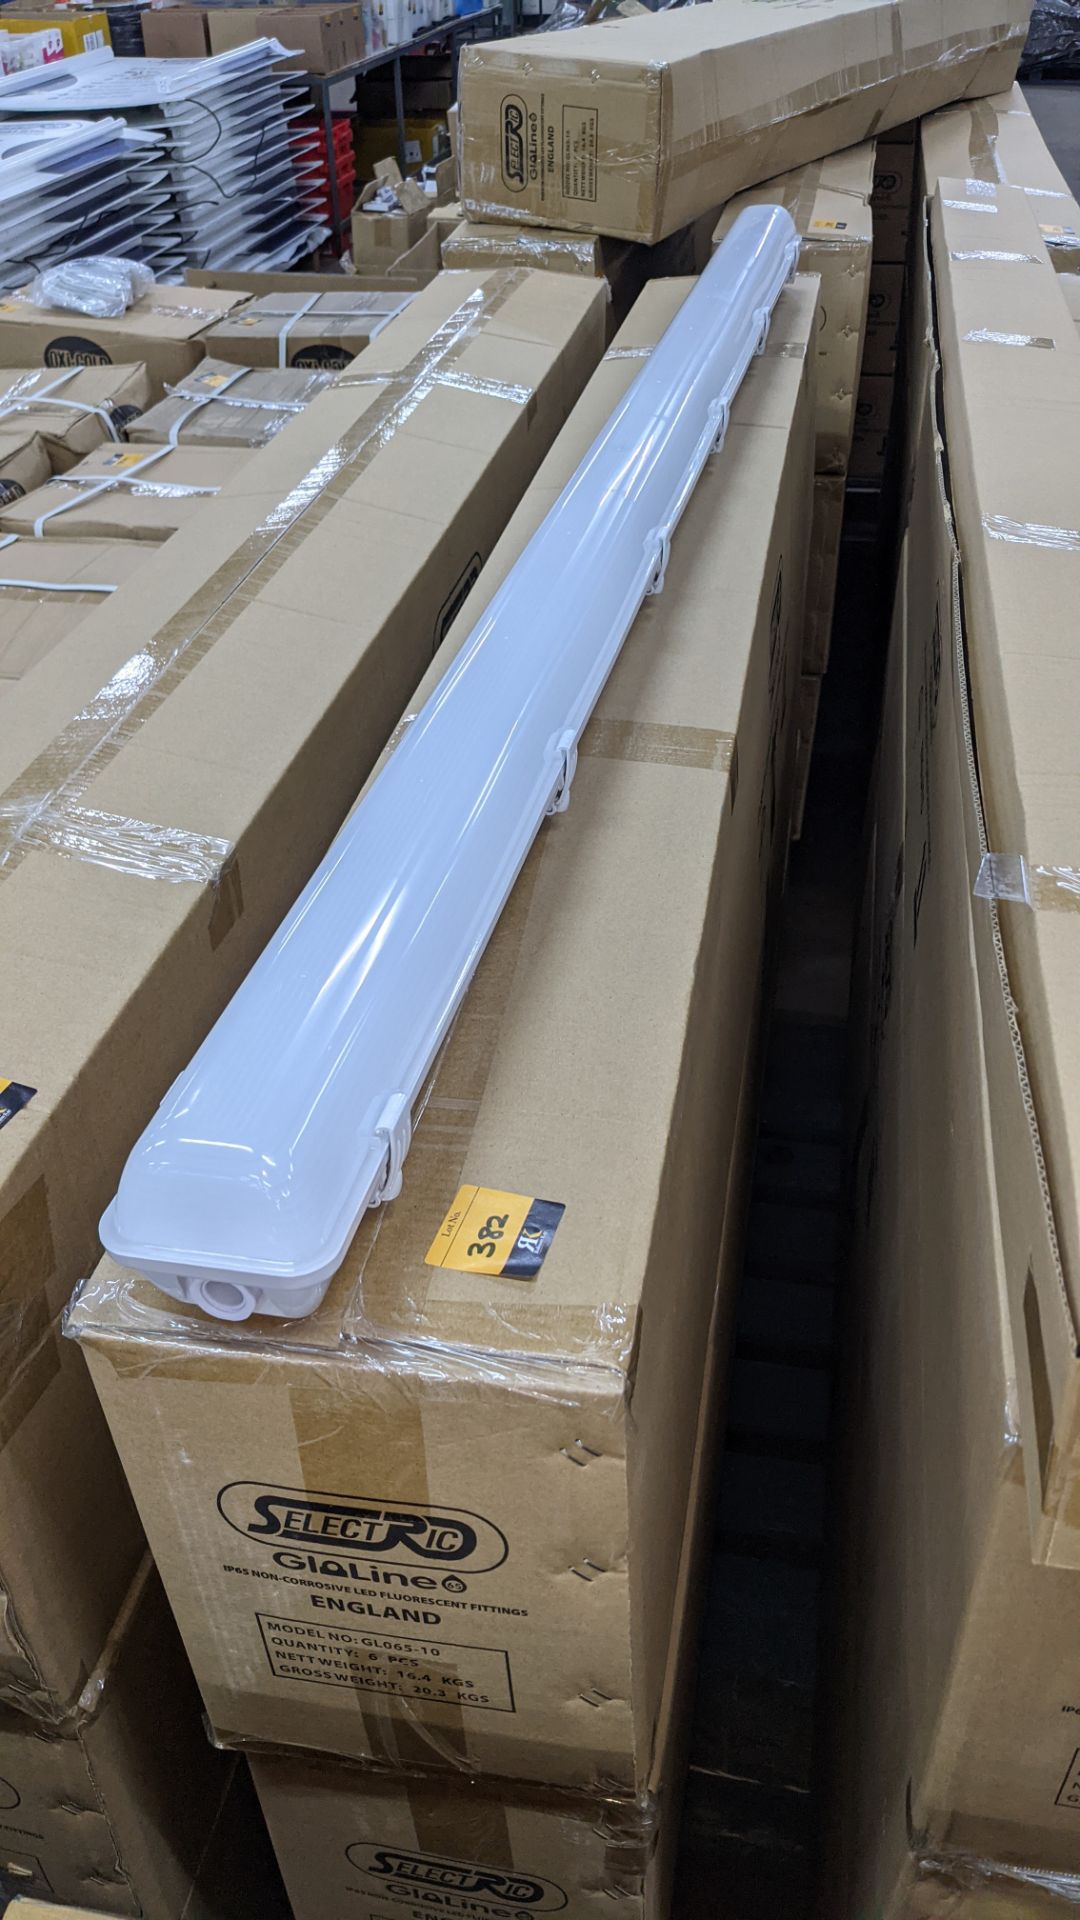 18 off IP65 non-corrosive LED fluorescent light fittings. Model GLO65-10, 6', single LED 40W (with - Image 2 of 4